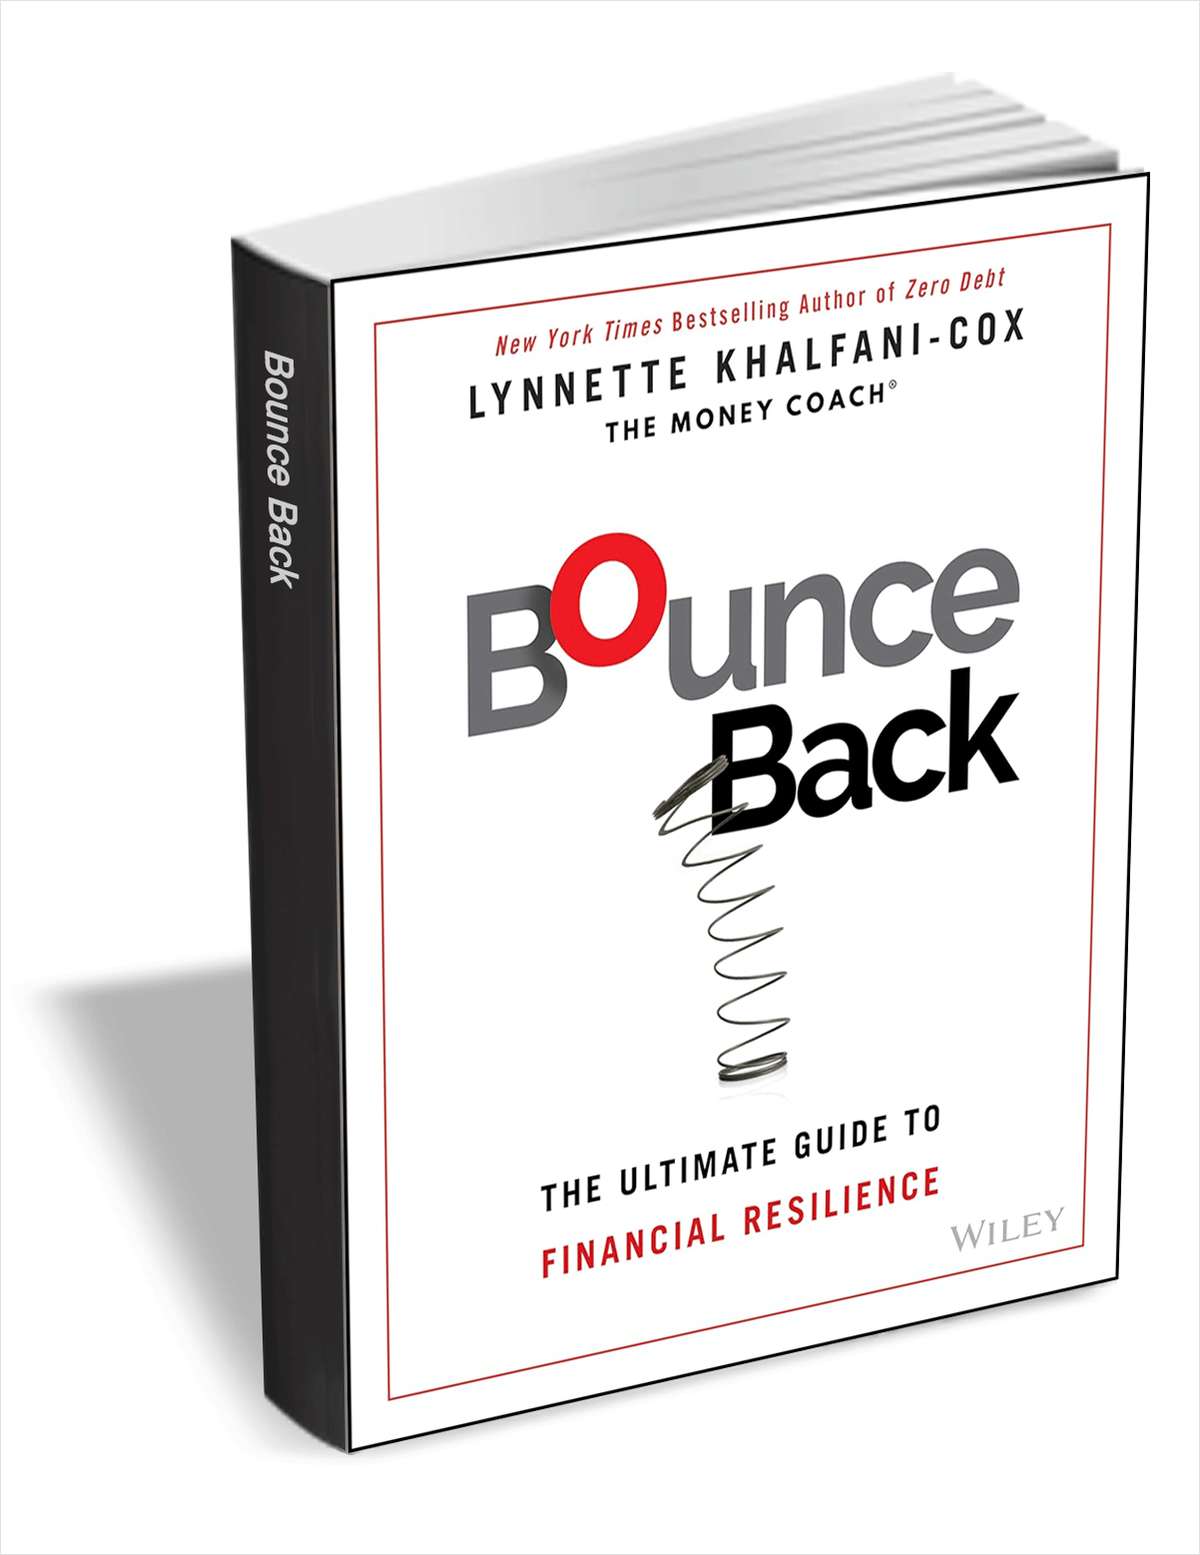 Bounce Back: The Ultimate Guide to Financial Resilience ($18.00 Value) FREE for a Limited Time